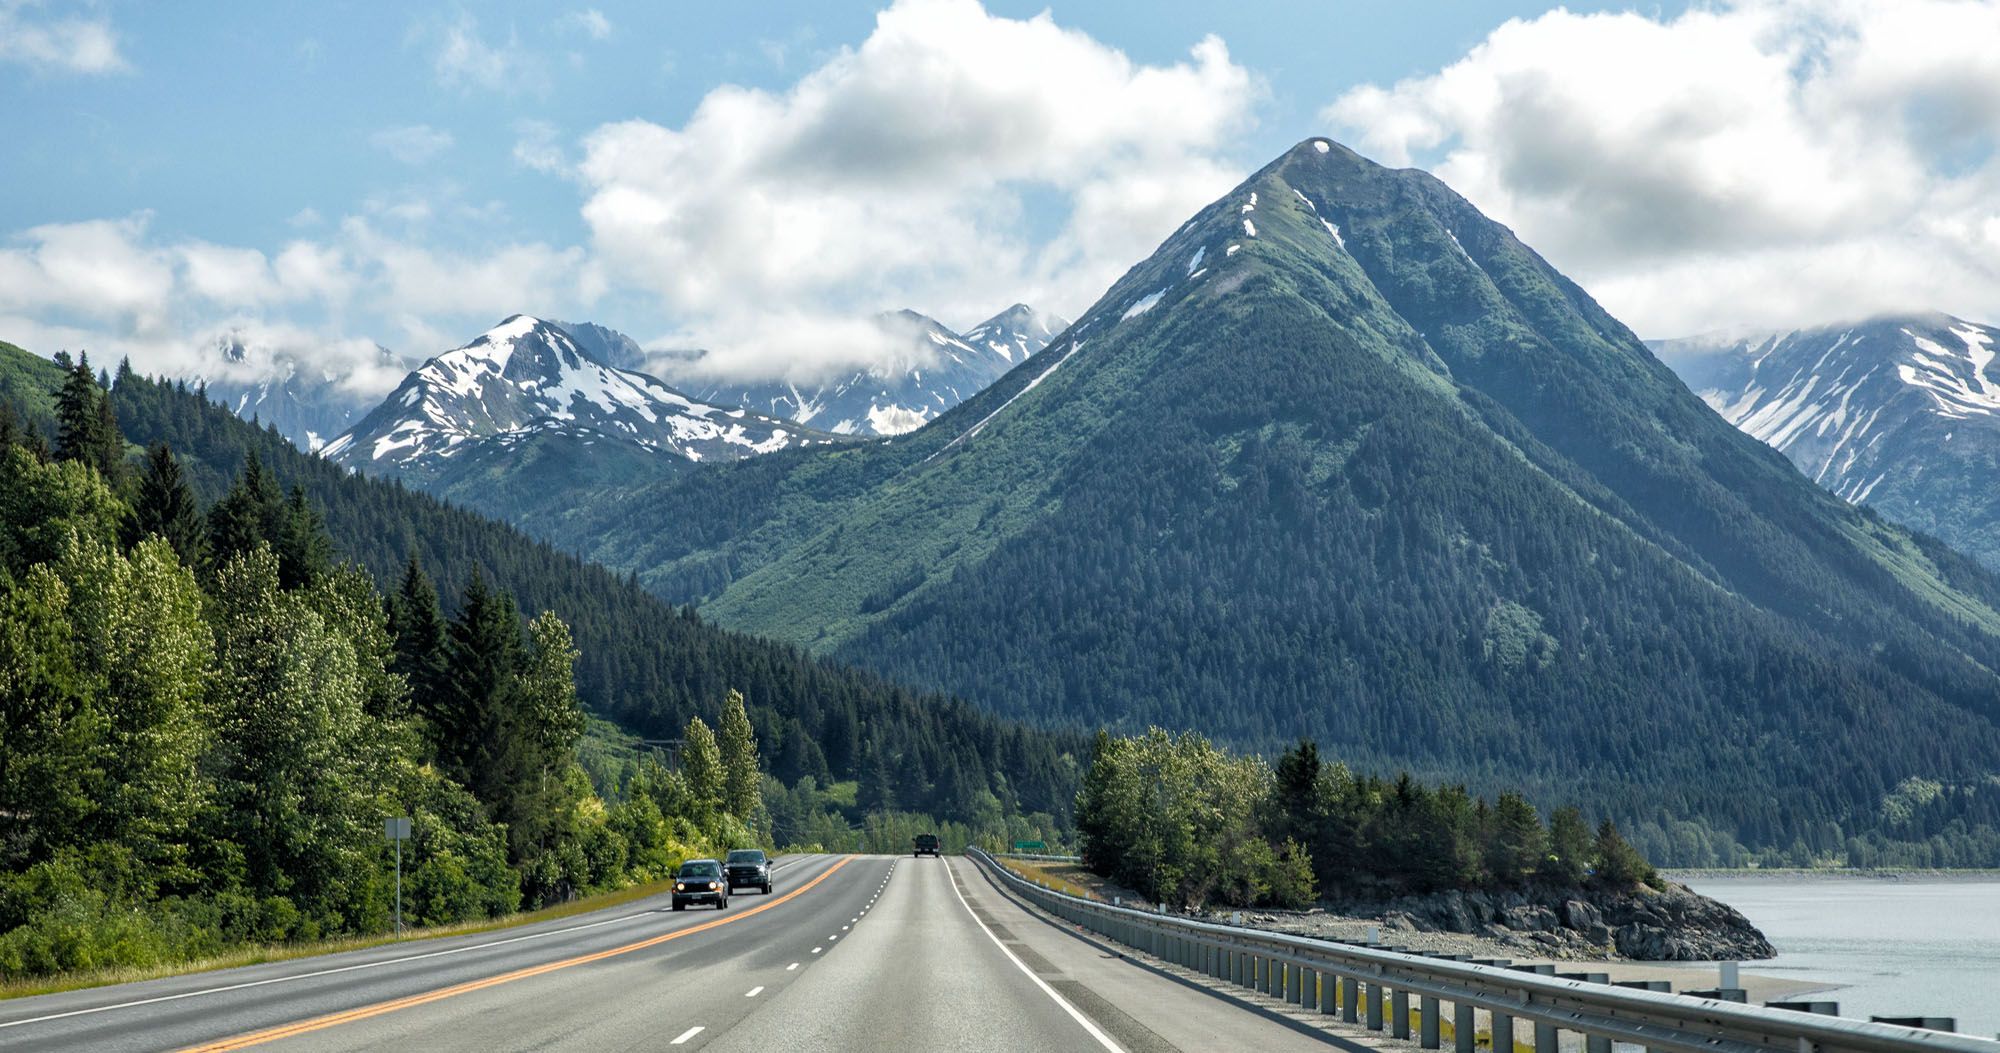 Featured image for “Driving the Seward Highway: Best Things to Do, Map, & Photos”